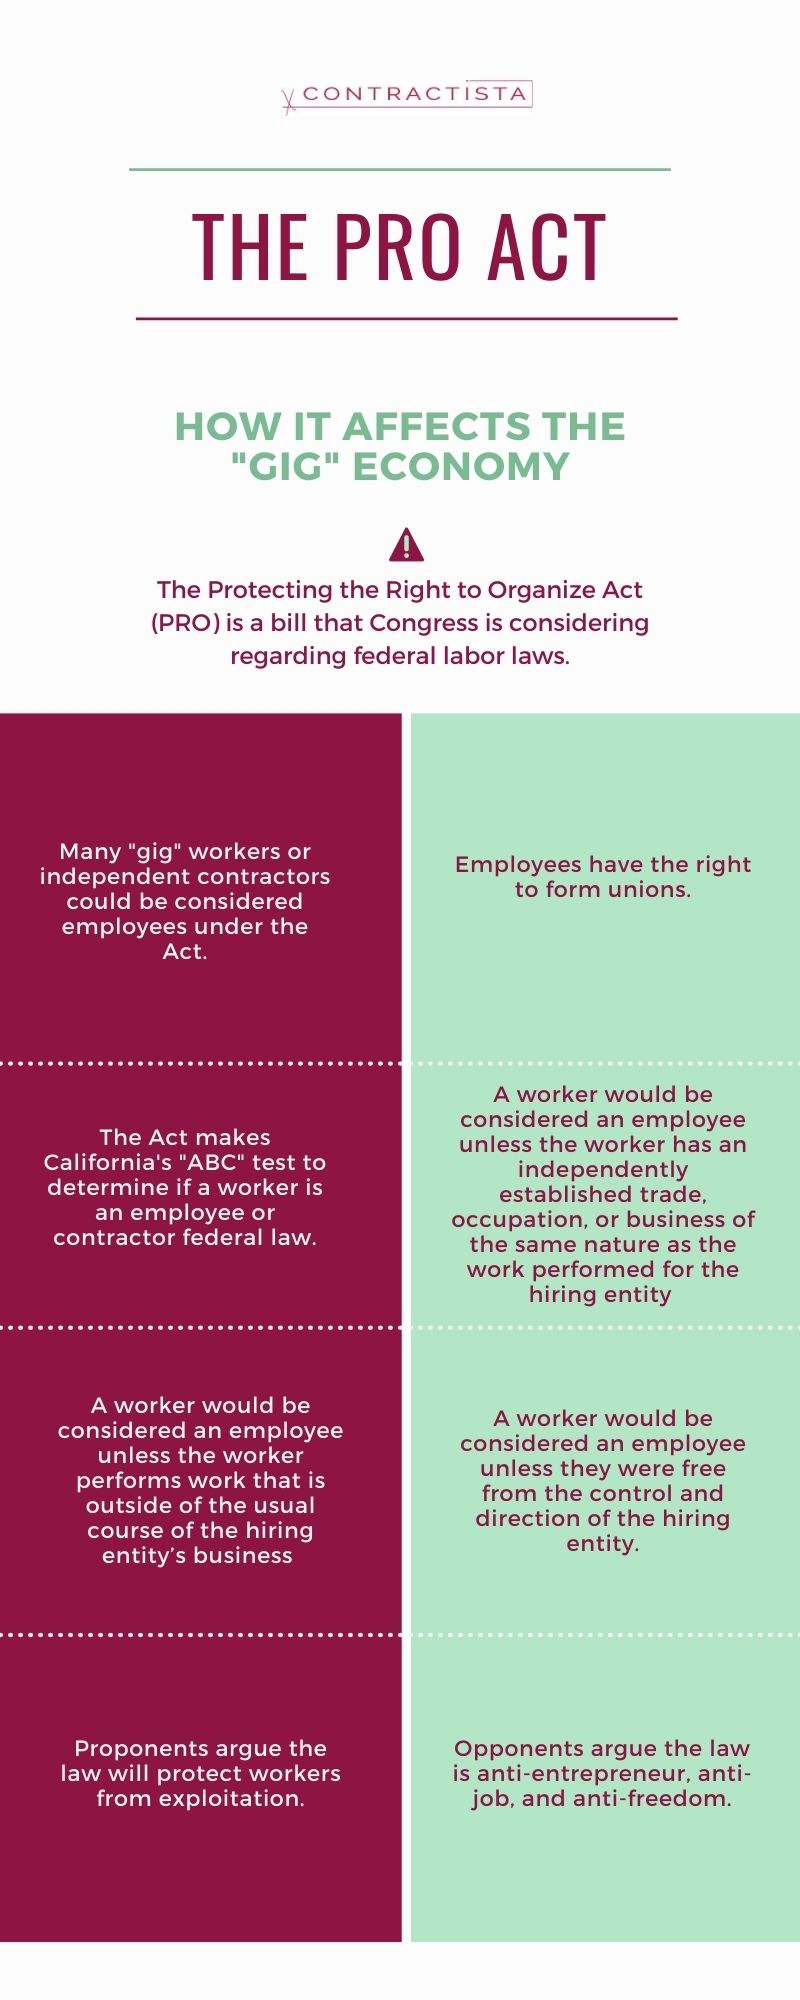 PRO Act affects independent contractors